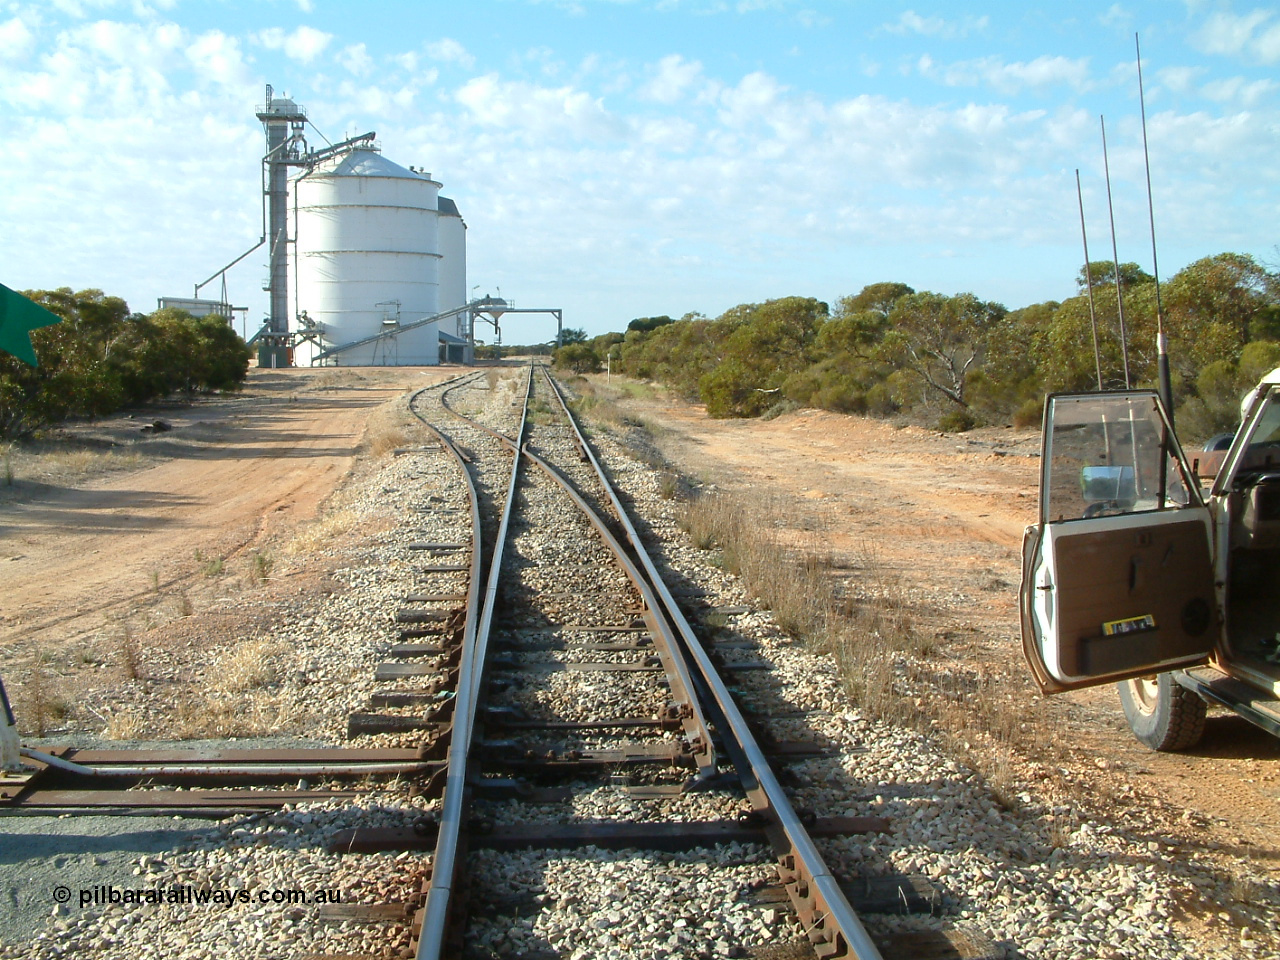 030406 082324
Murdinga, yard overview looking south down the mainline from the north end, with grain siding and silo complex with outflow spout on gantry over both tracks. 6th April 2003.
